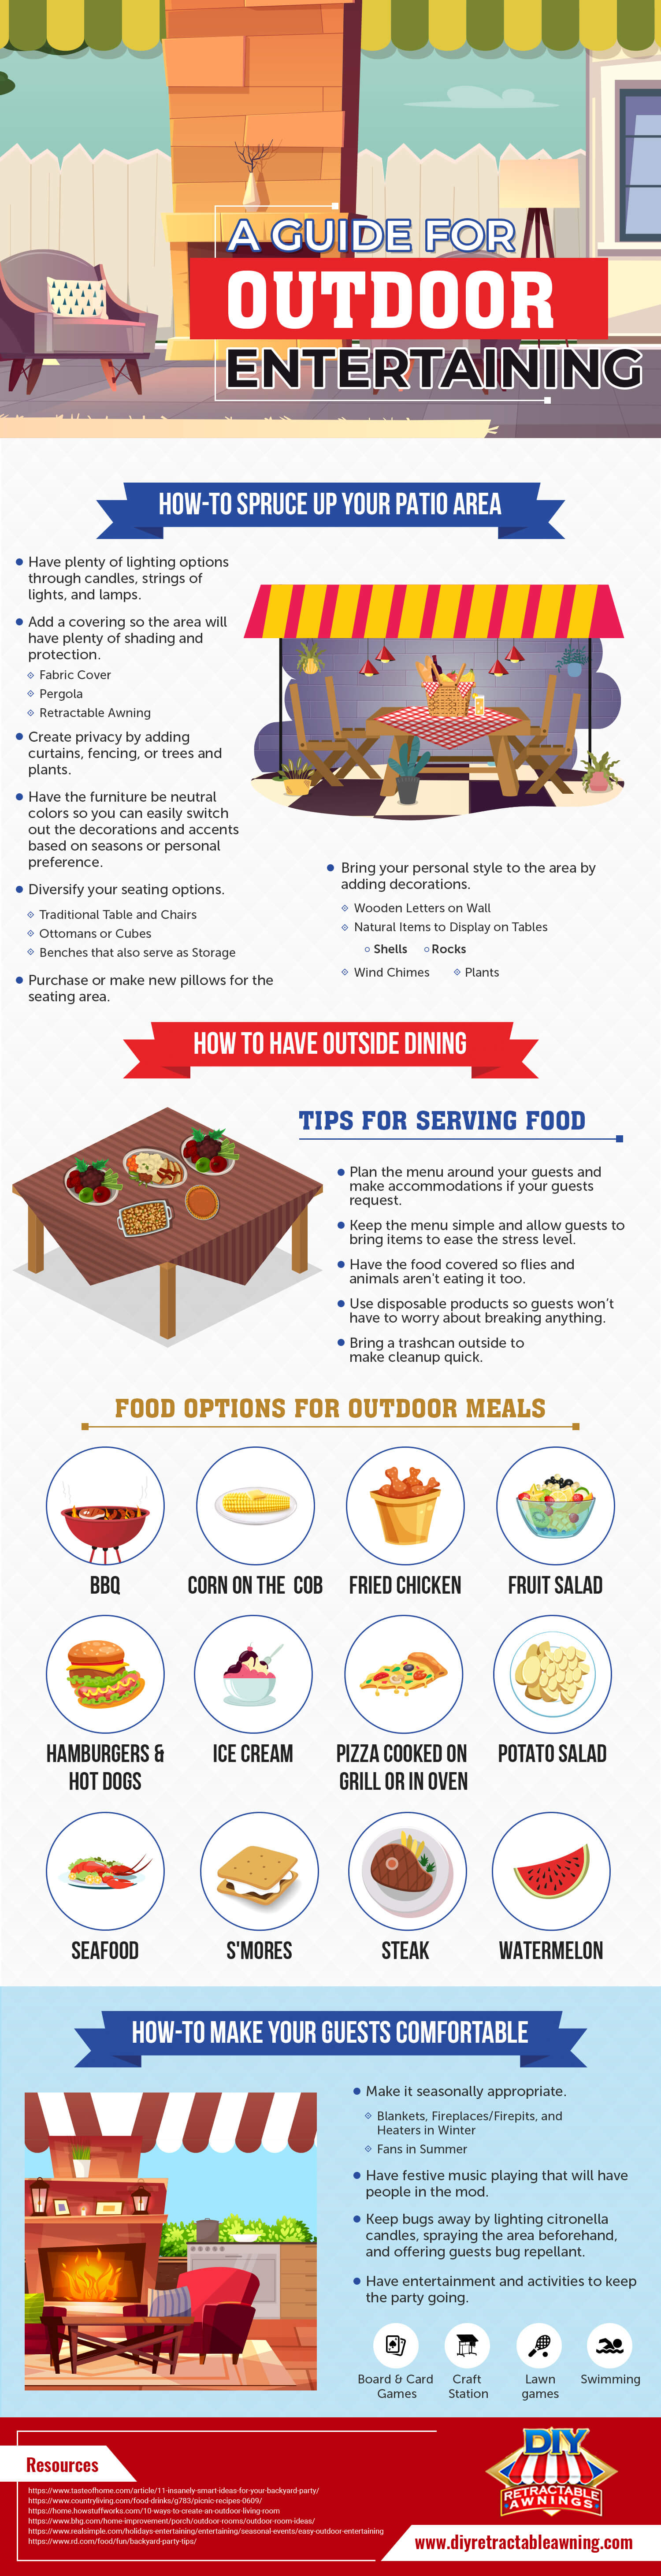 A Guide for Outdoor Entertaining